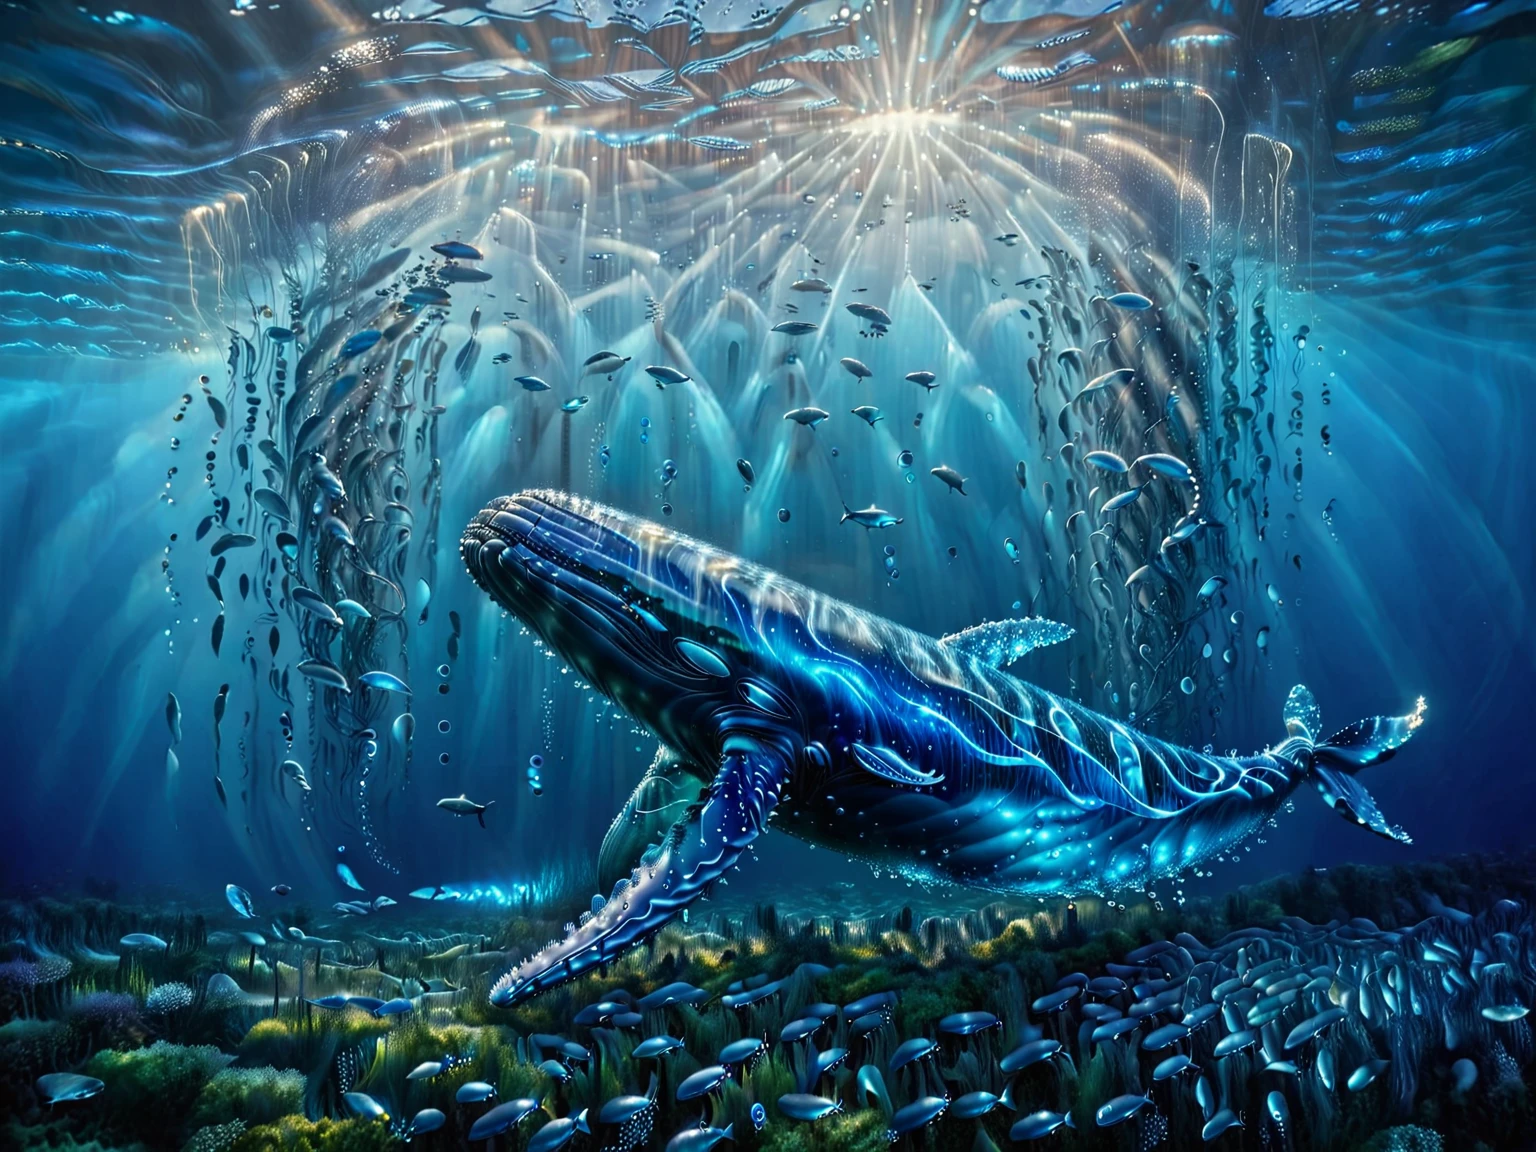 It depicts an underwater scene of a large whale surrounded by a school of small fish.。The whale is positioned vertically into the water.、The tail is at the bottom of the image、Head facing up towards the water surface。The surrounding water is colored in various tones of blue.、It gives a sense of depth and serenity.。I see a ray of light from above、Water surface is nearby